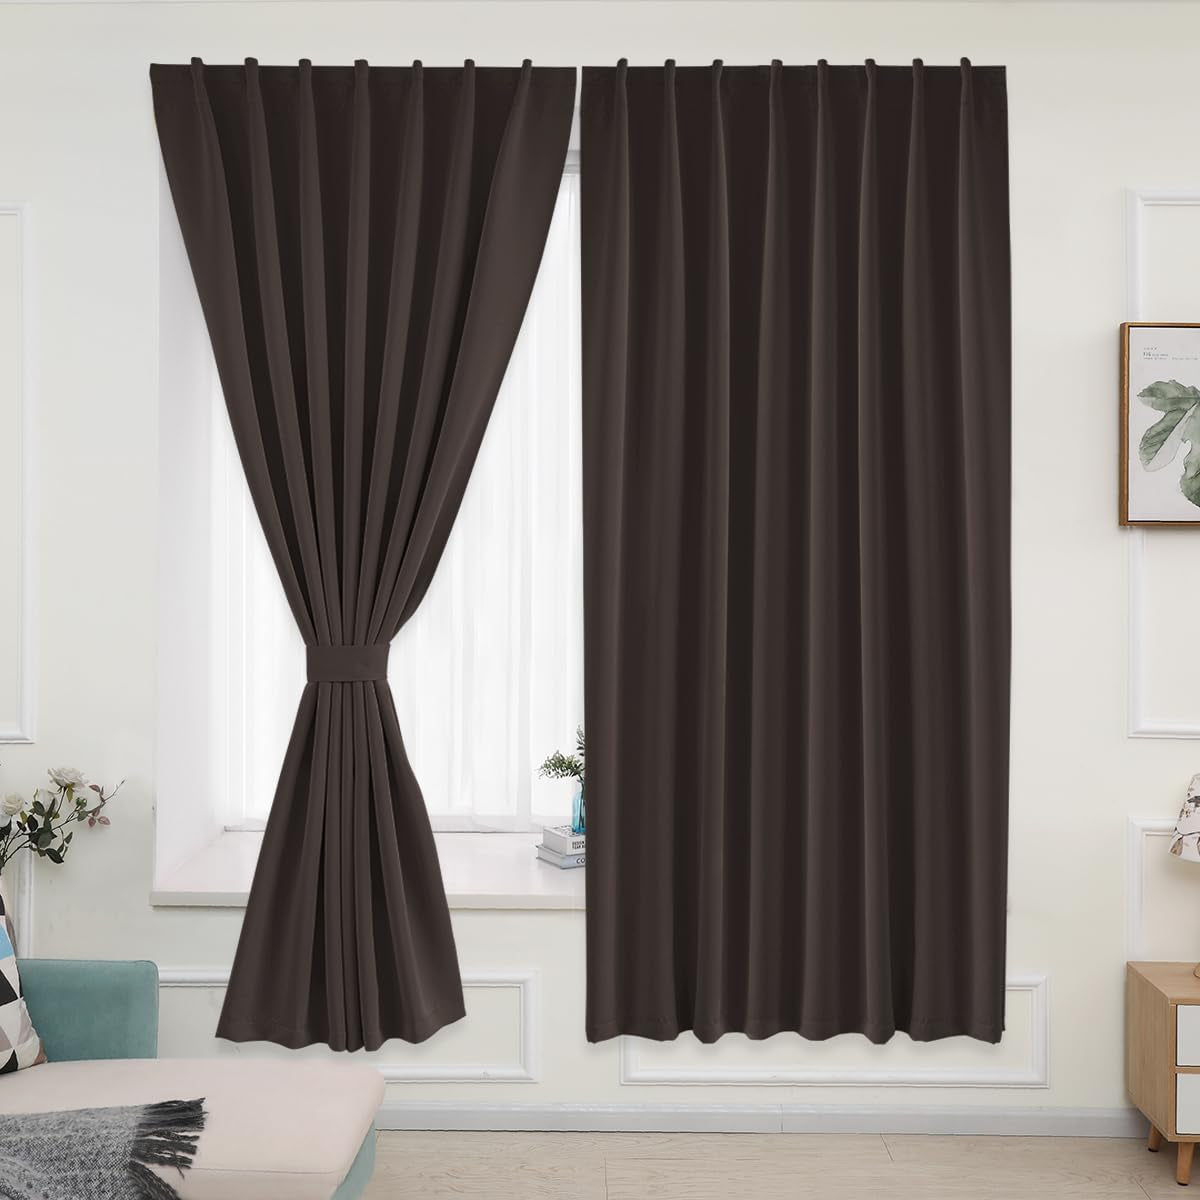 Muamar 2Pcs Blackout Curtains Privacy Curtains 63 Inch Length Window Curtains,Easy Install Thermal Insulated Window Shades,Stick Curtains No Rods, Black 42" W X 63" L  Muamar Coffee 52"W X 63"L 